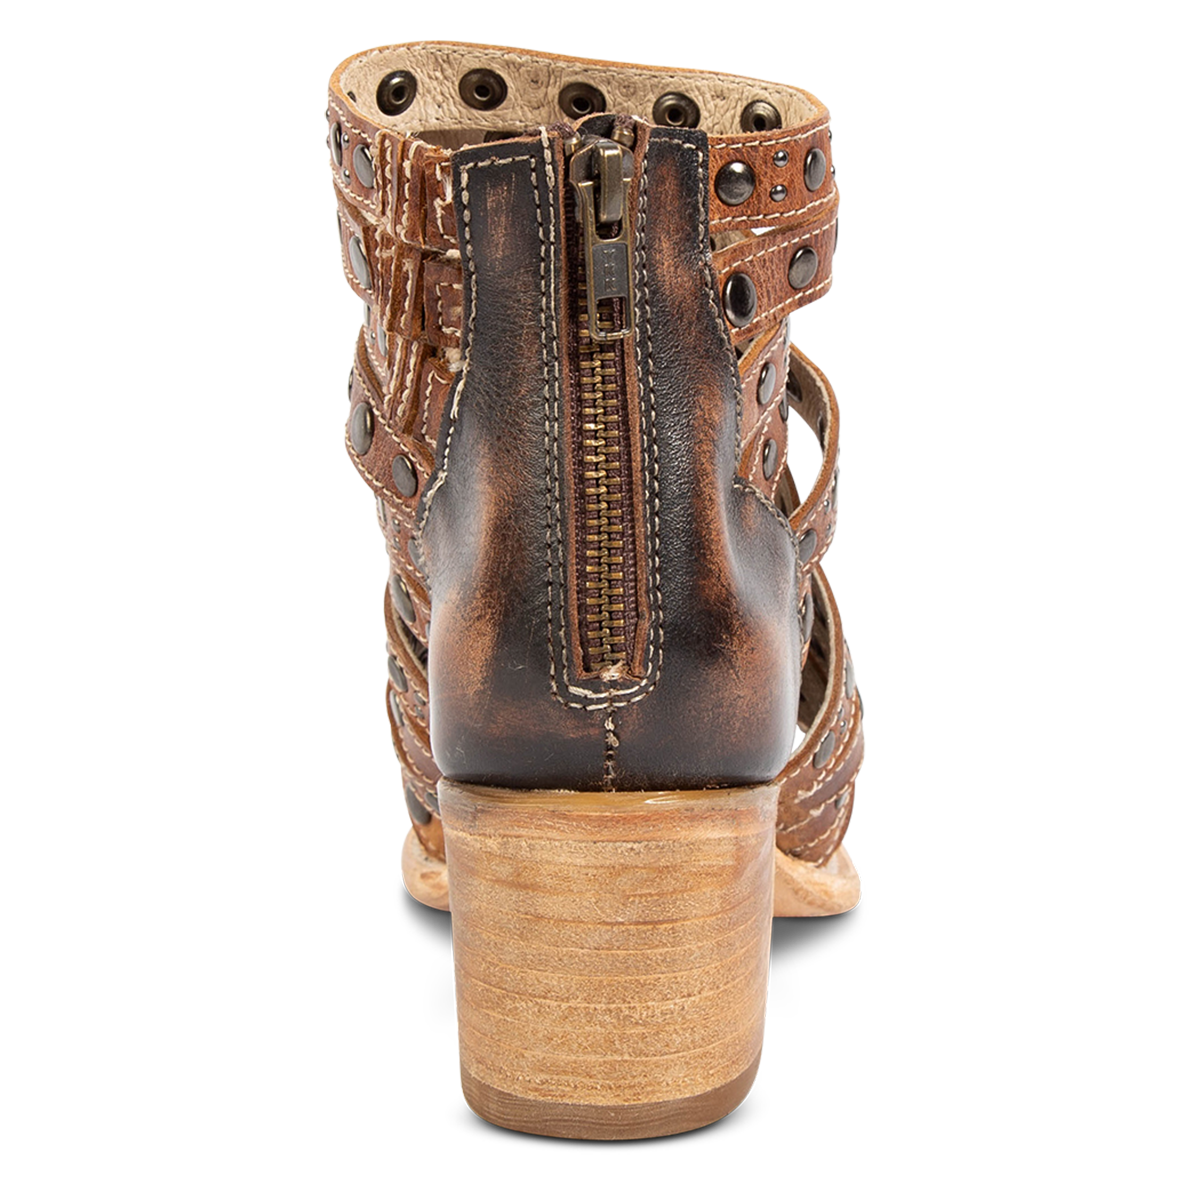 Back view showing a working brass zipper and stacked heel on FREEBIRD women's Cannes cognac leather sandal